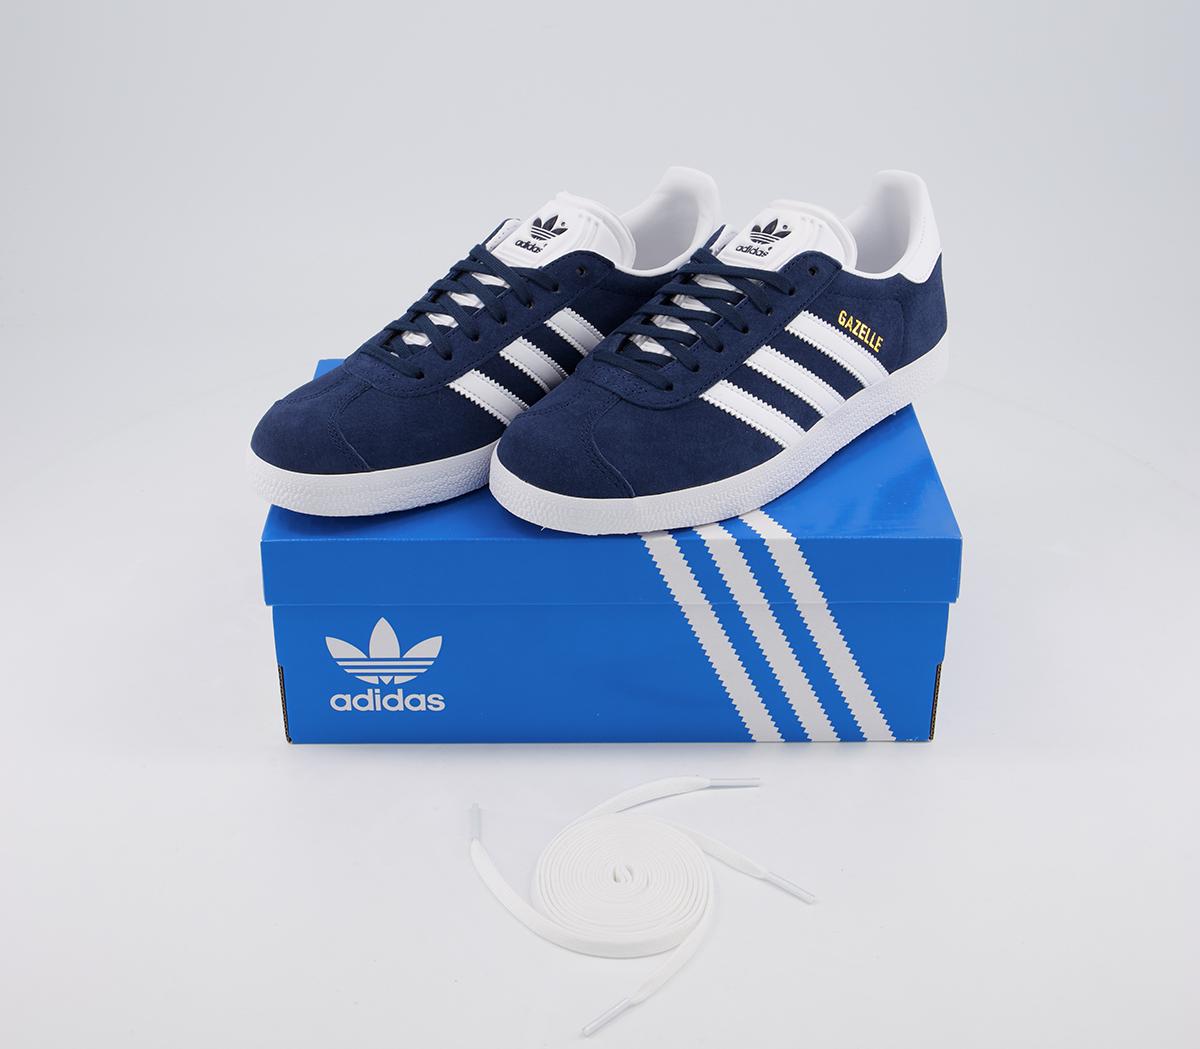 adidas Gazelle Trainers Collegiate Navy White - His trainers